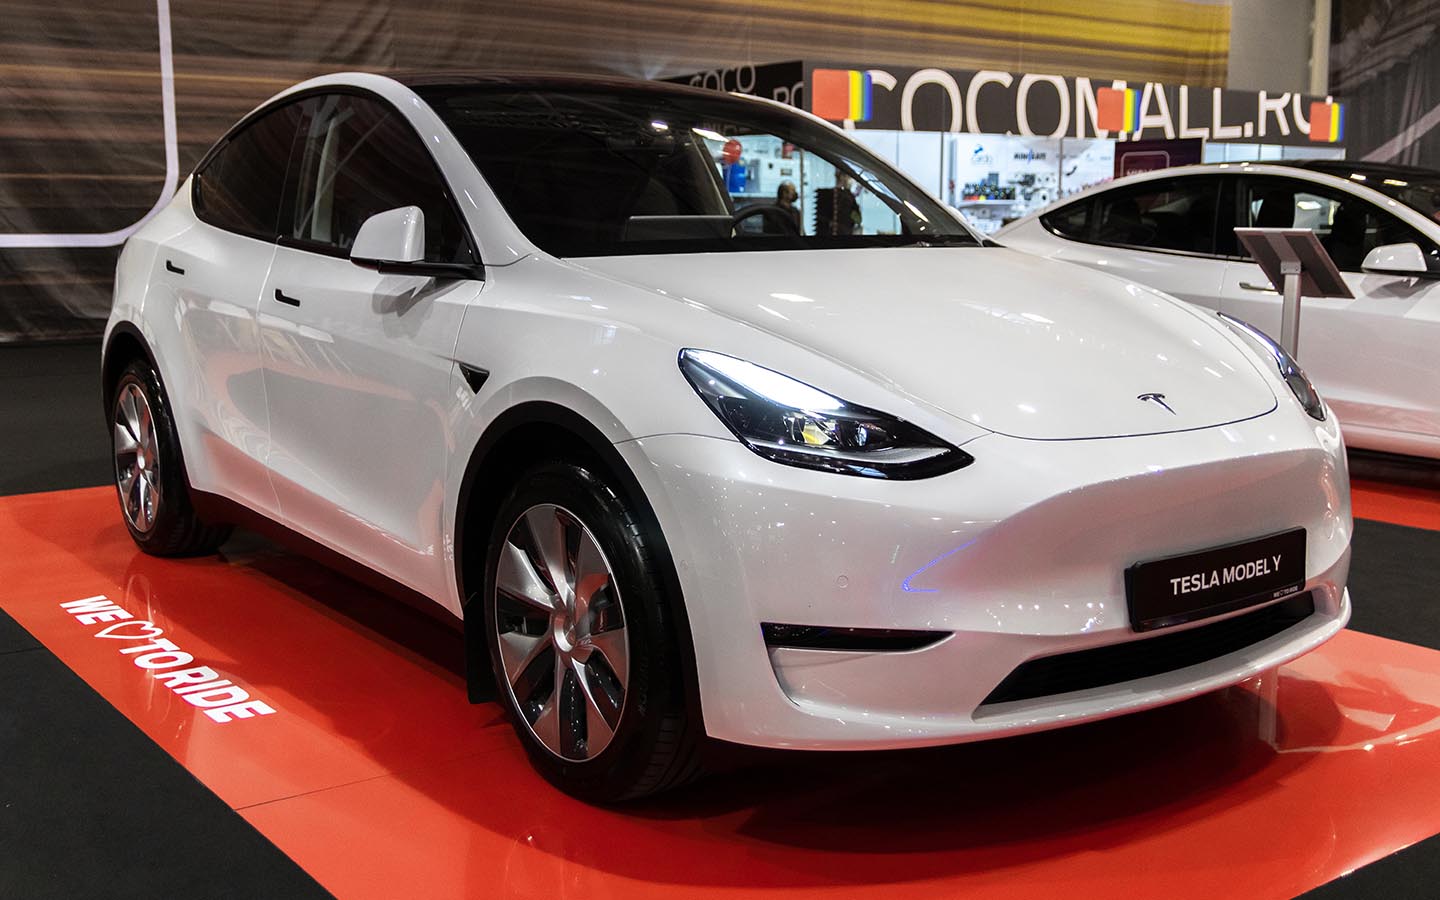 Tesla model y is one of the most popular electric SUVs in the UAE